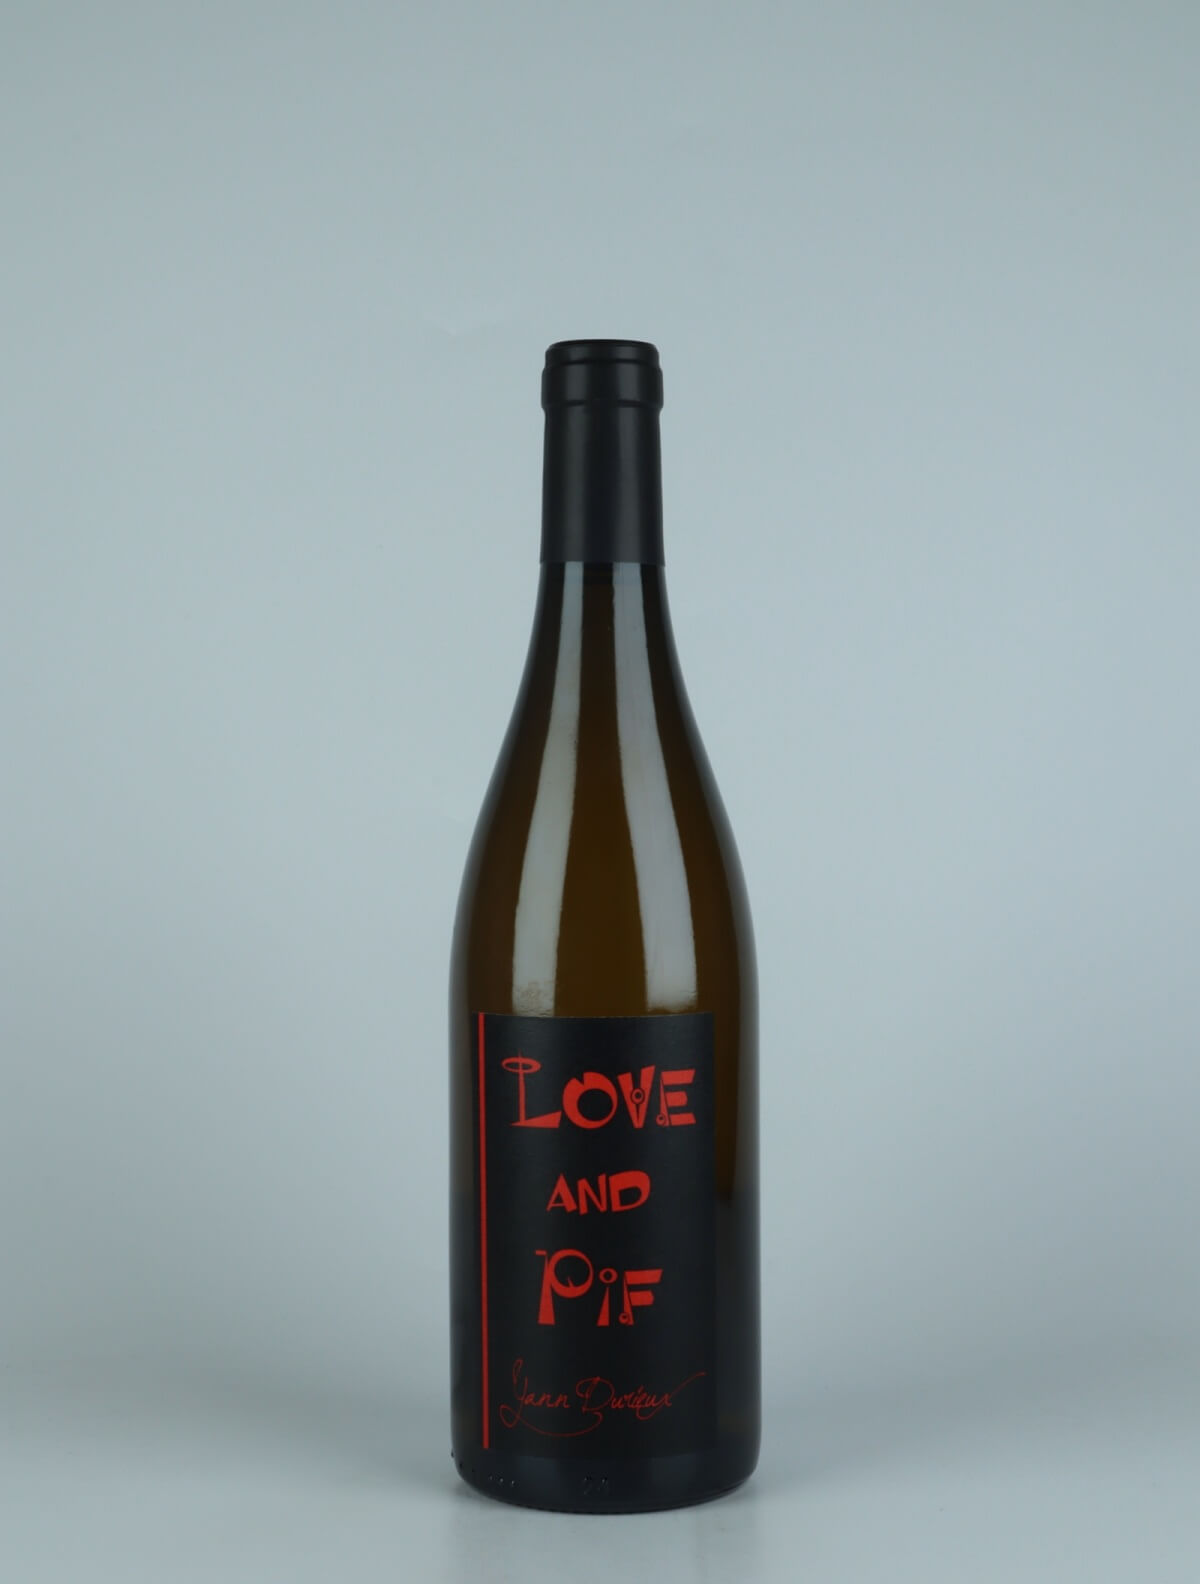 A bottle 2020 Aligoté - Love and Pif White wine from Yann Durieux, Burgundy in France